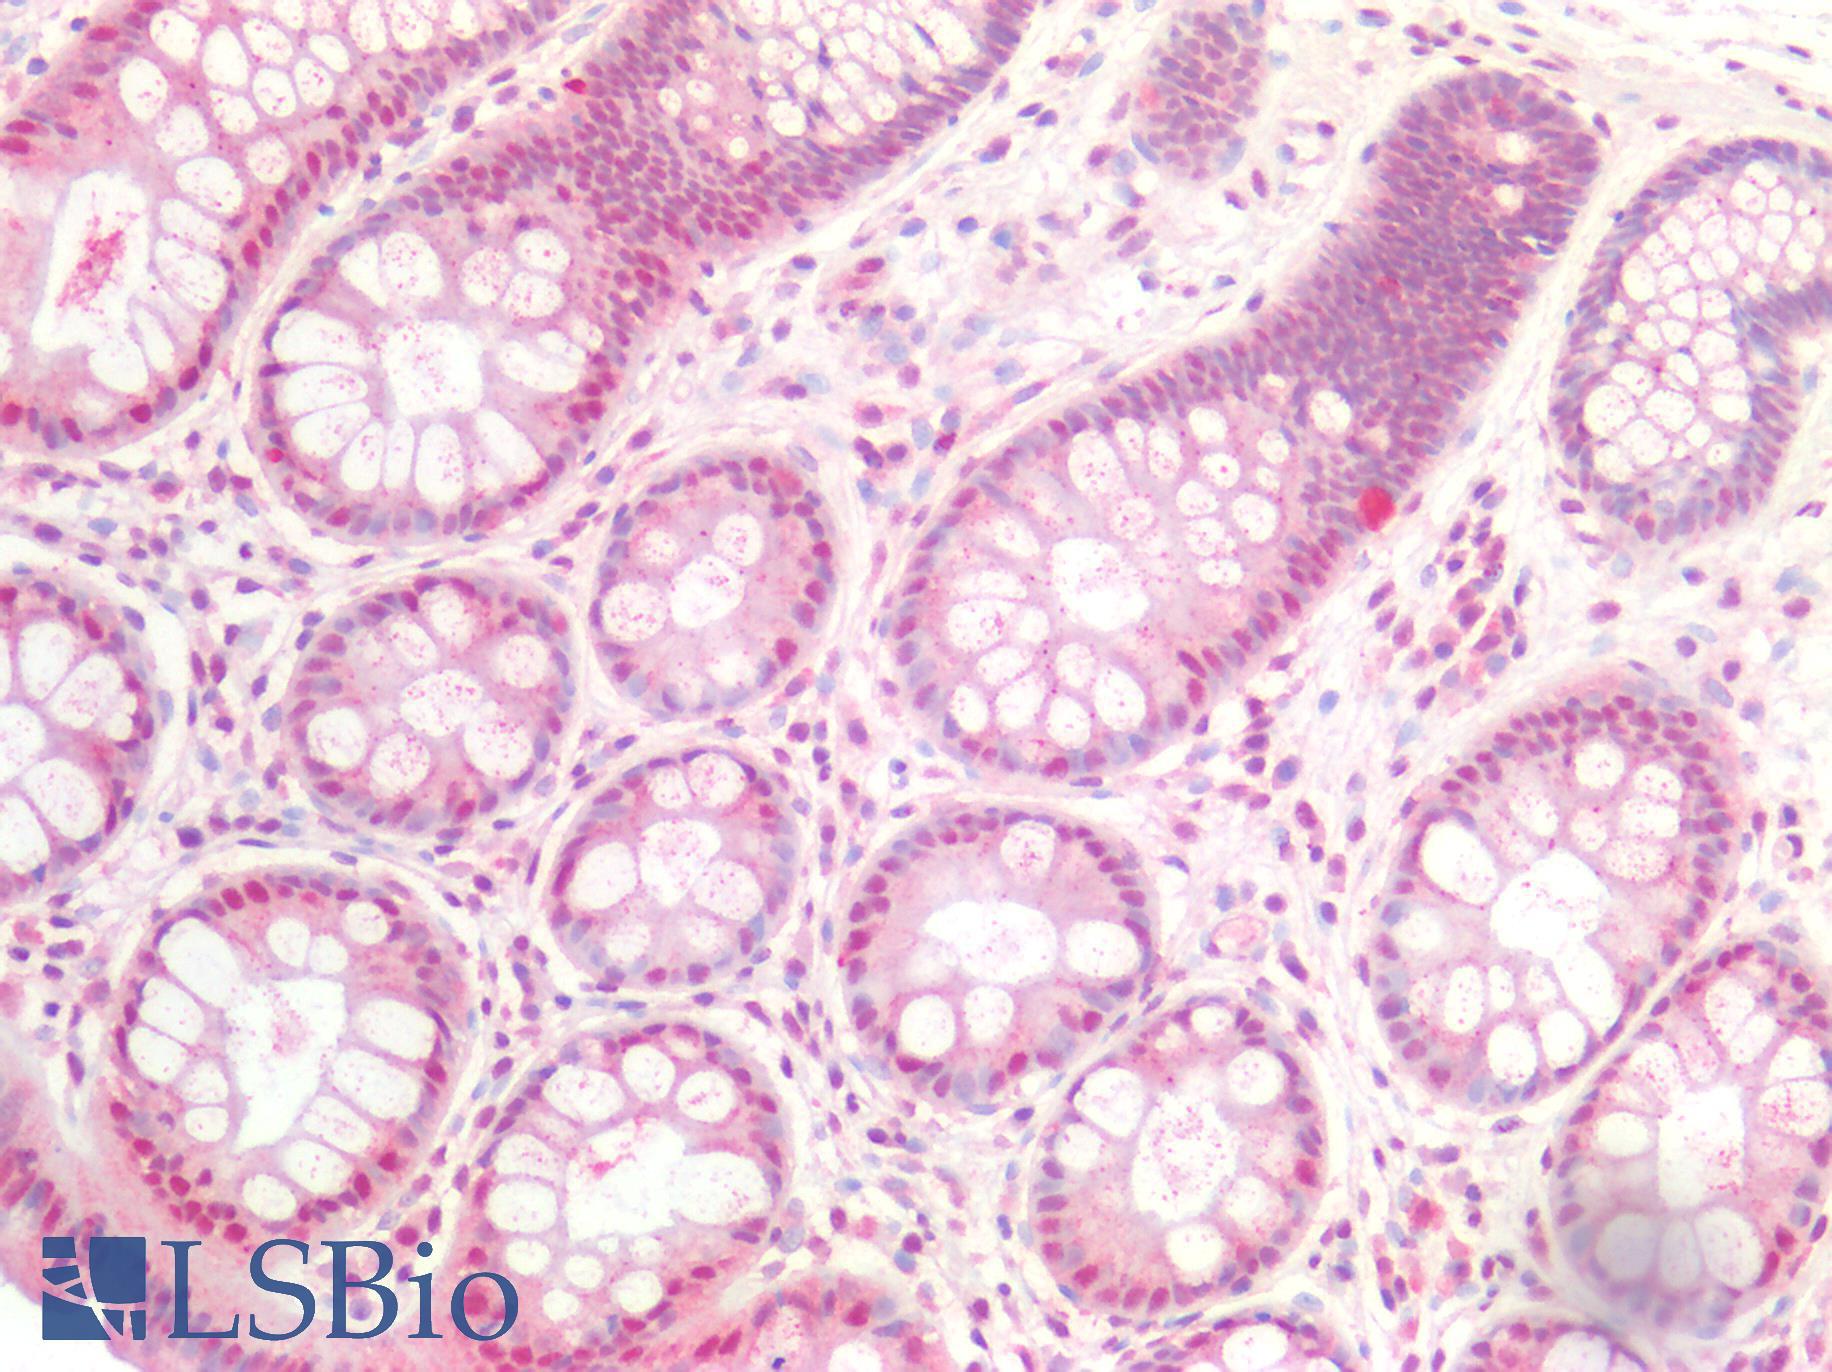 SMAD3 Antibody - Human Colon: Formalin-Fixed, Paraffin-Embedded (FFPE)